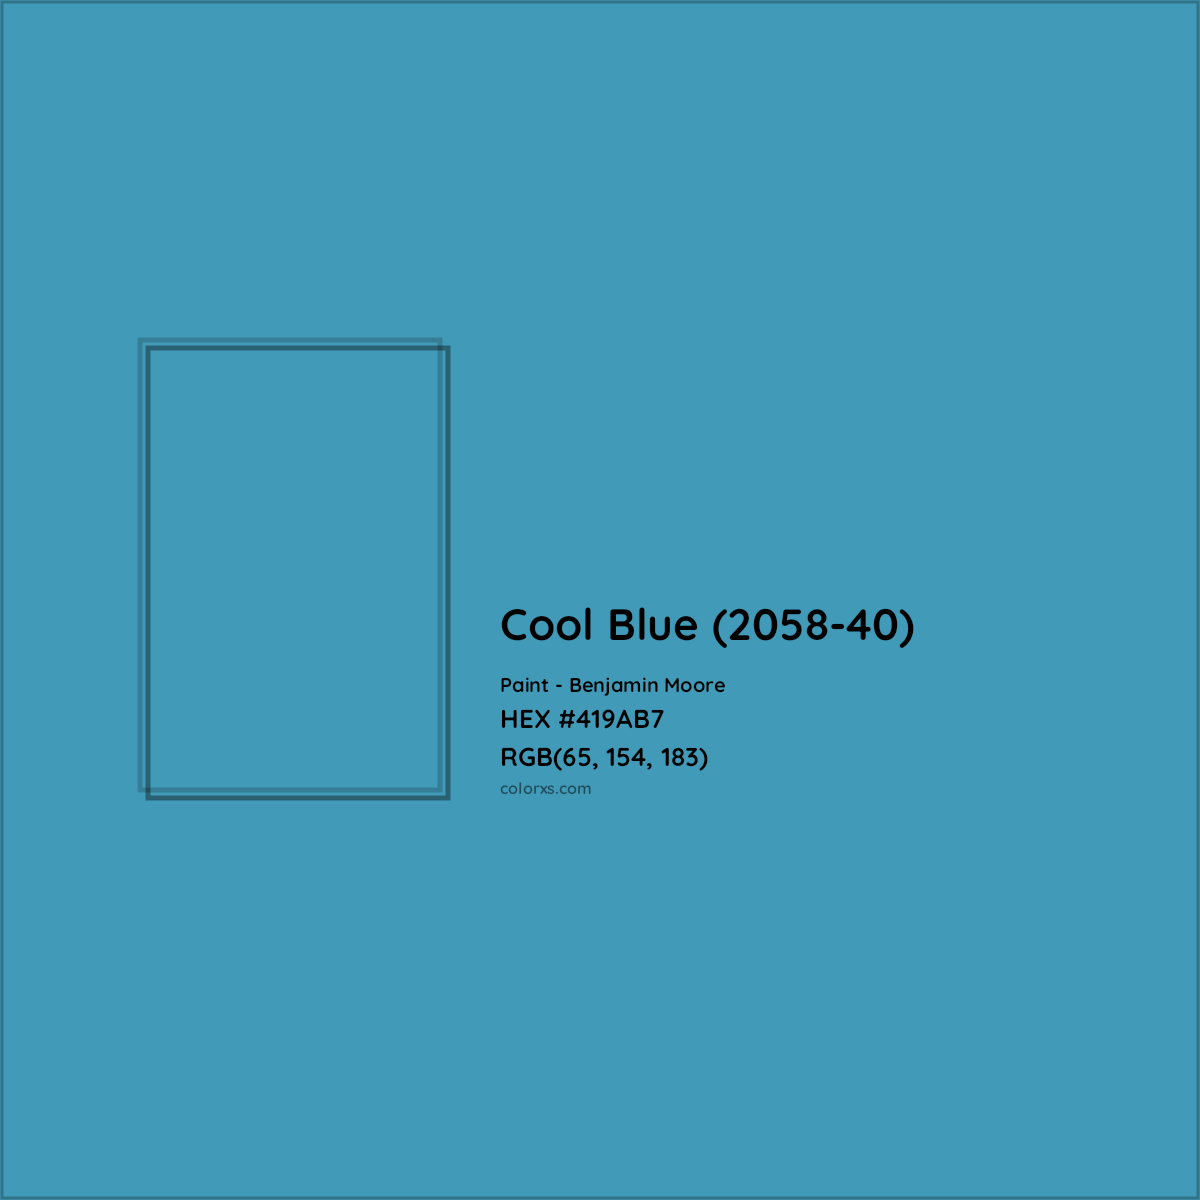 HEX #419AB7 Cool Blue (2058-40) Paint Benjamin Moore - Color Code